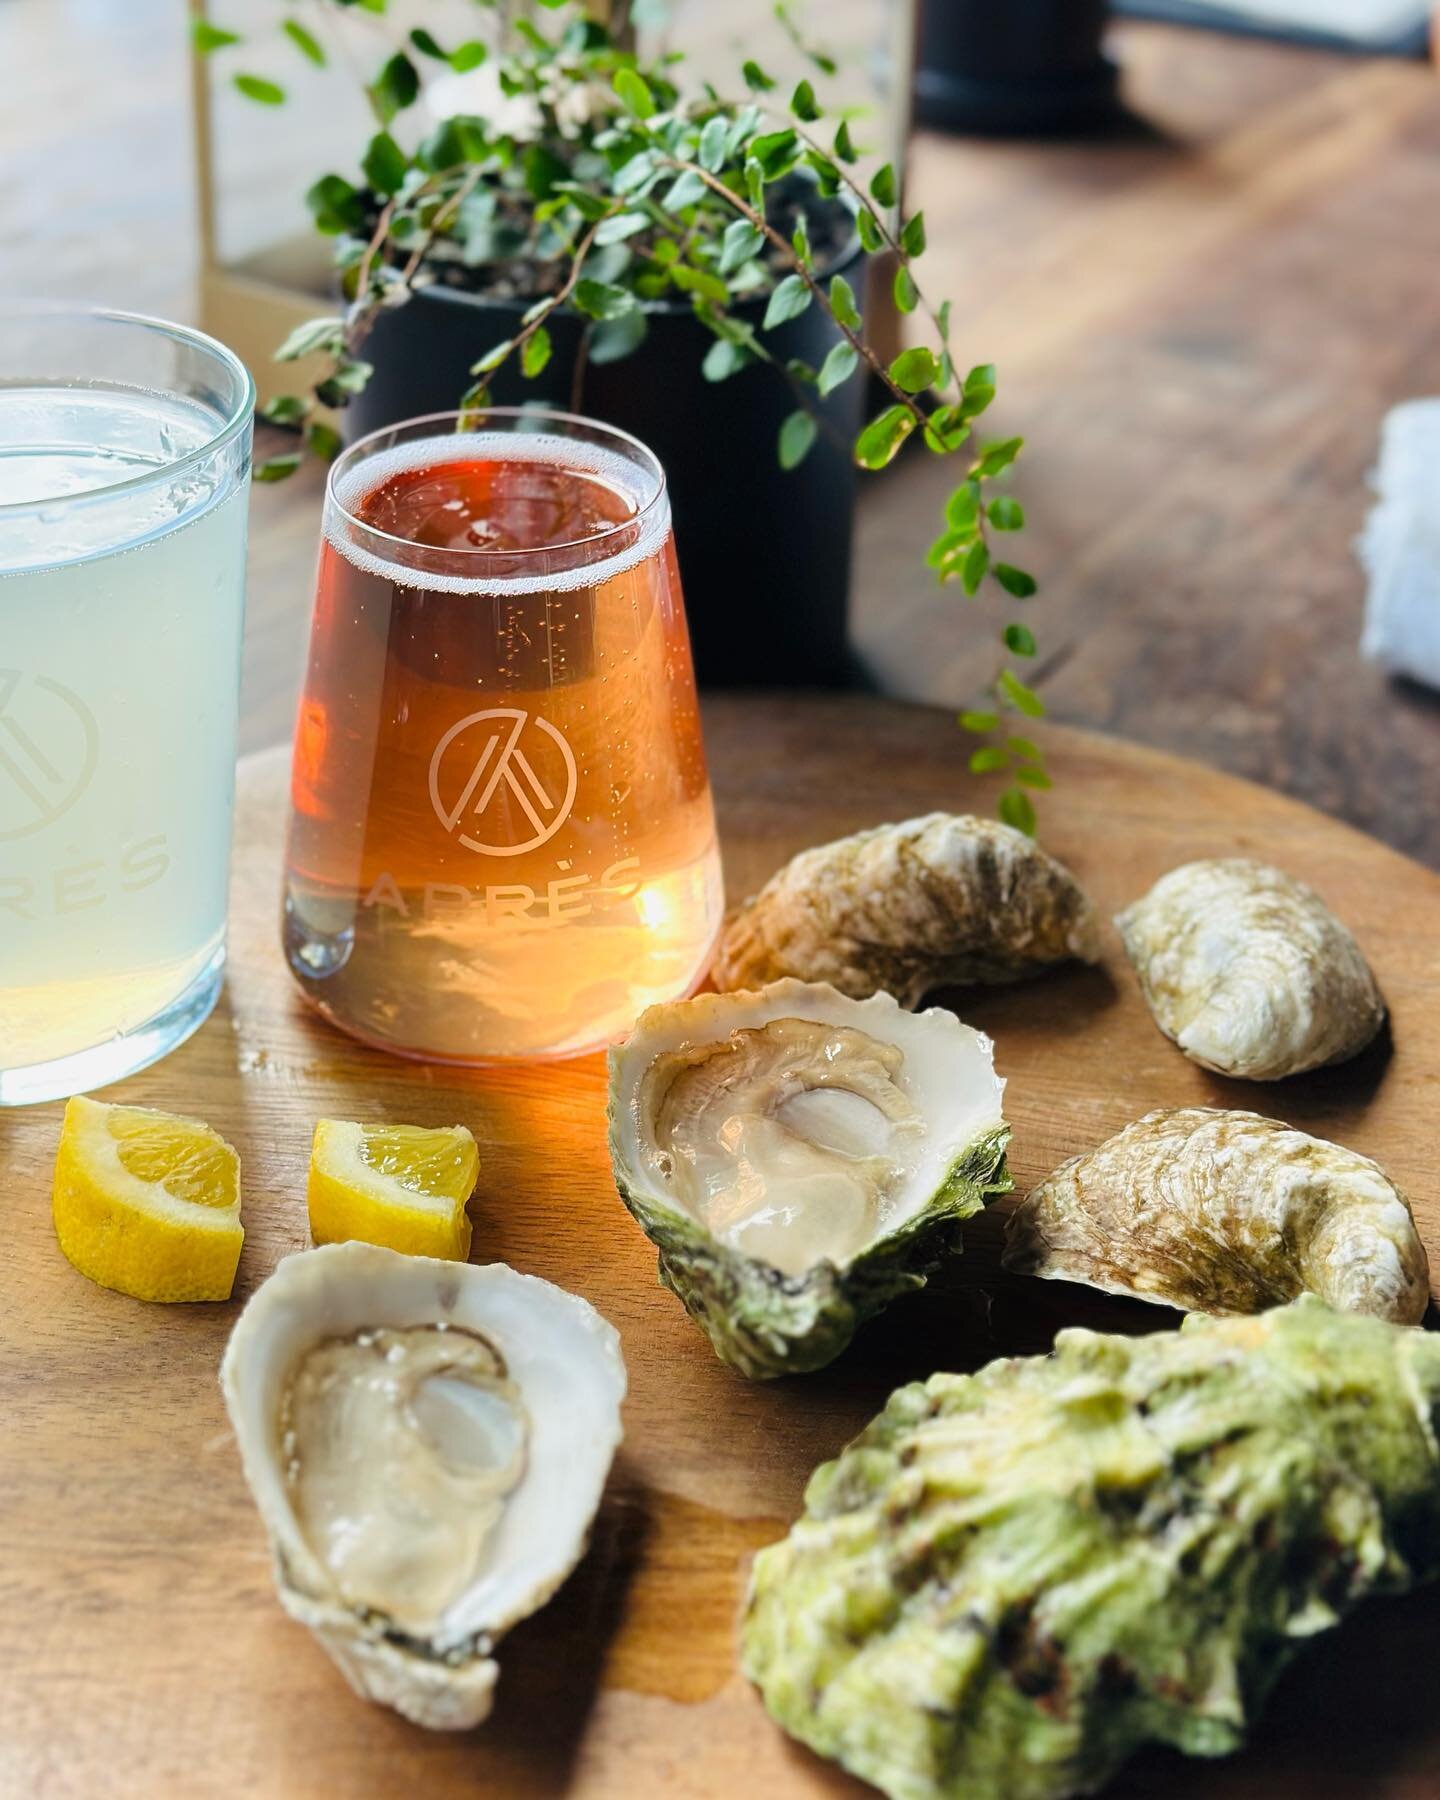 Bubbles, brine and sunshine! ☀️💃🫧🦪💫 
Come thru to one of our favorite spots @apresdrinks 4-8pm today, shuckin the brine-rerific and beautiful @emilysoysters @empressoysters 🫶

#portland #maine #oyster #shuckin #events #come #thru #chill #bubbles